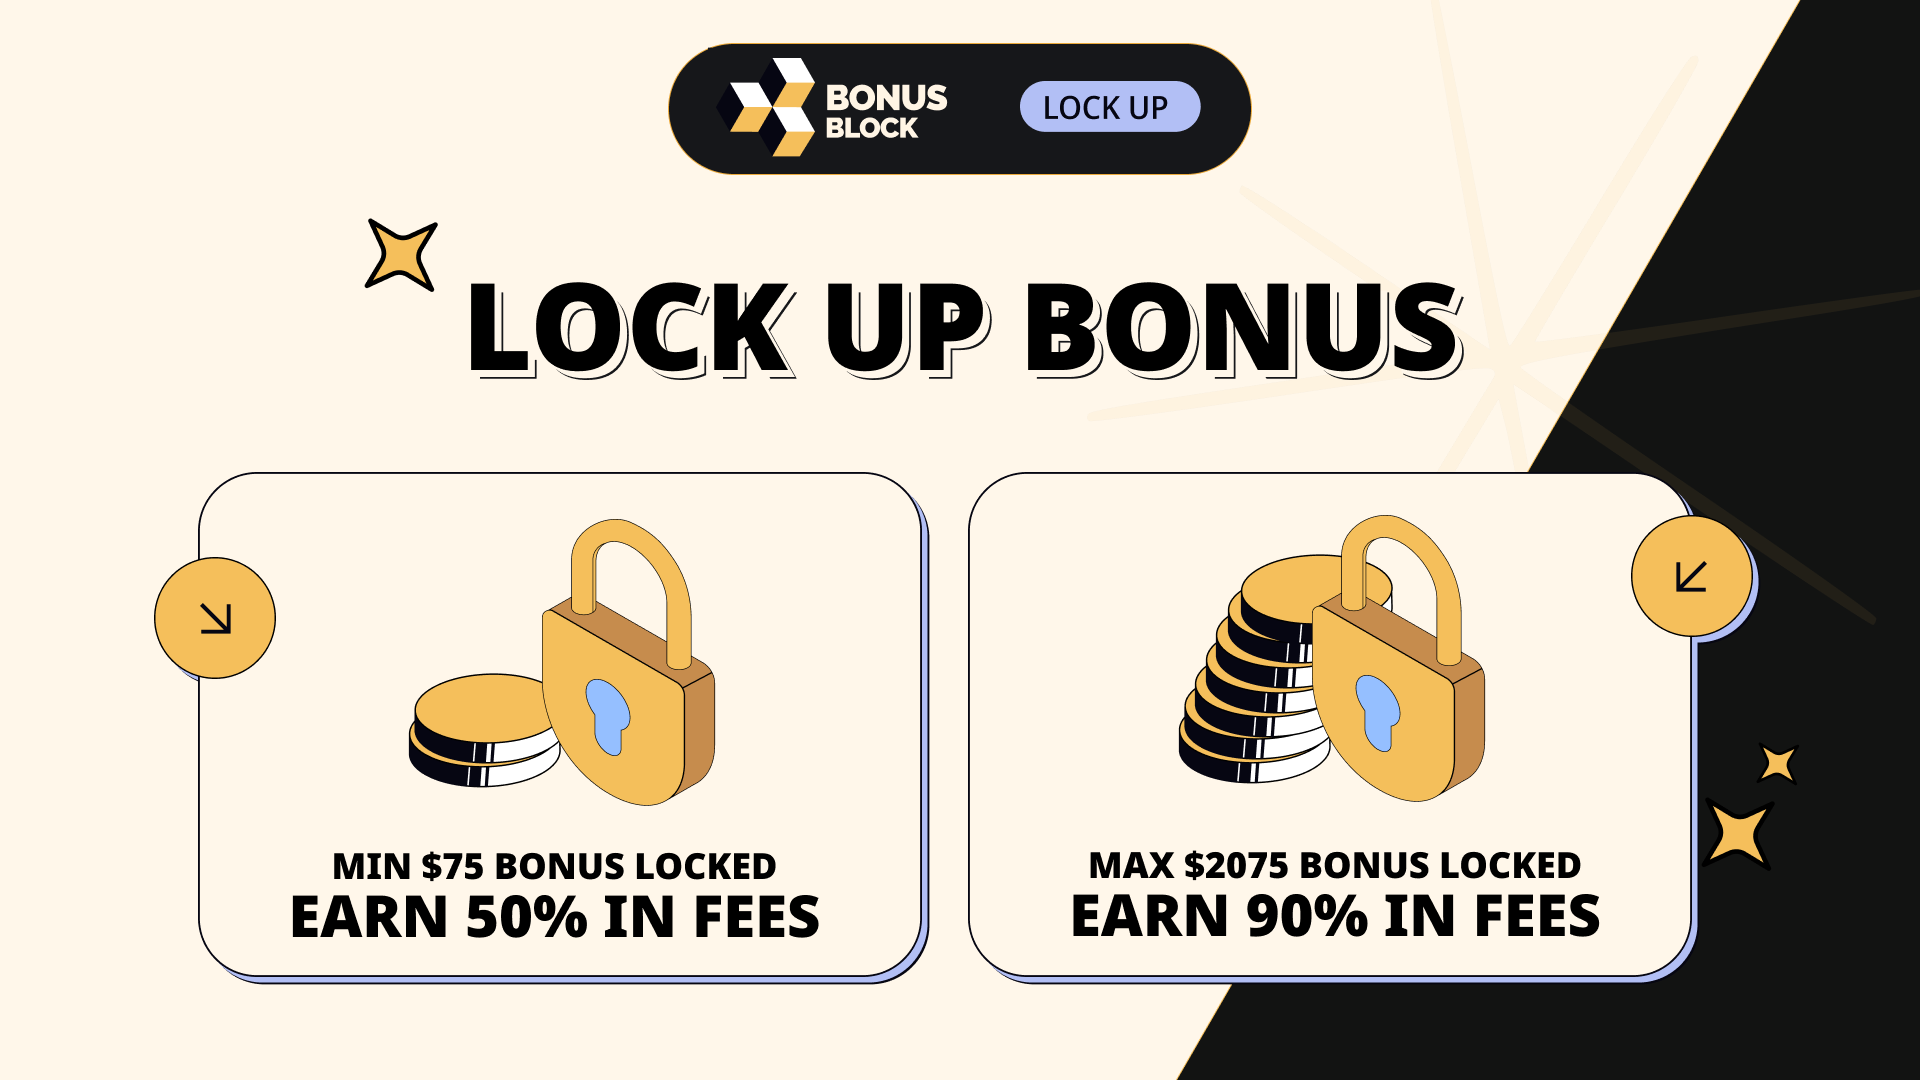 Remember, minimum lock-up is $75 worth of BONUS, climbing up to $2075 to get 90% of the fee payment from the projects.